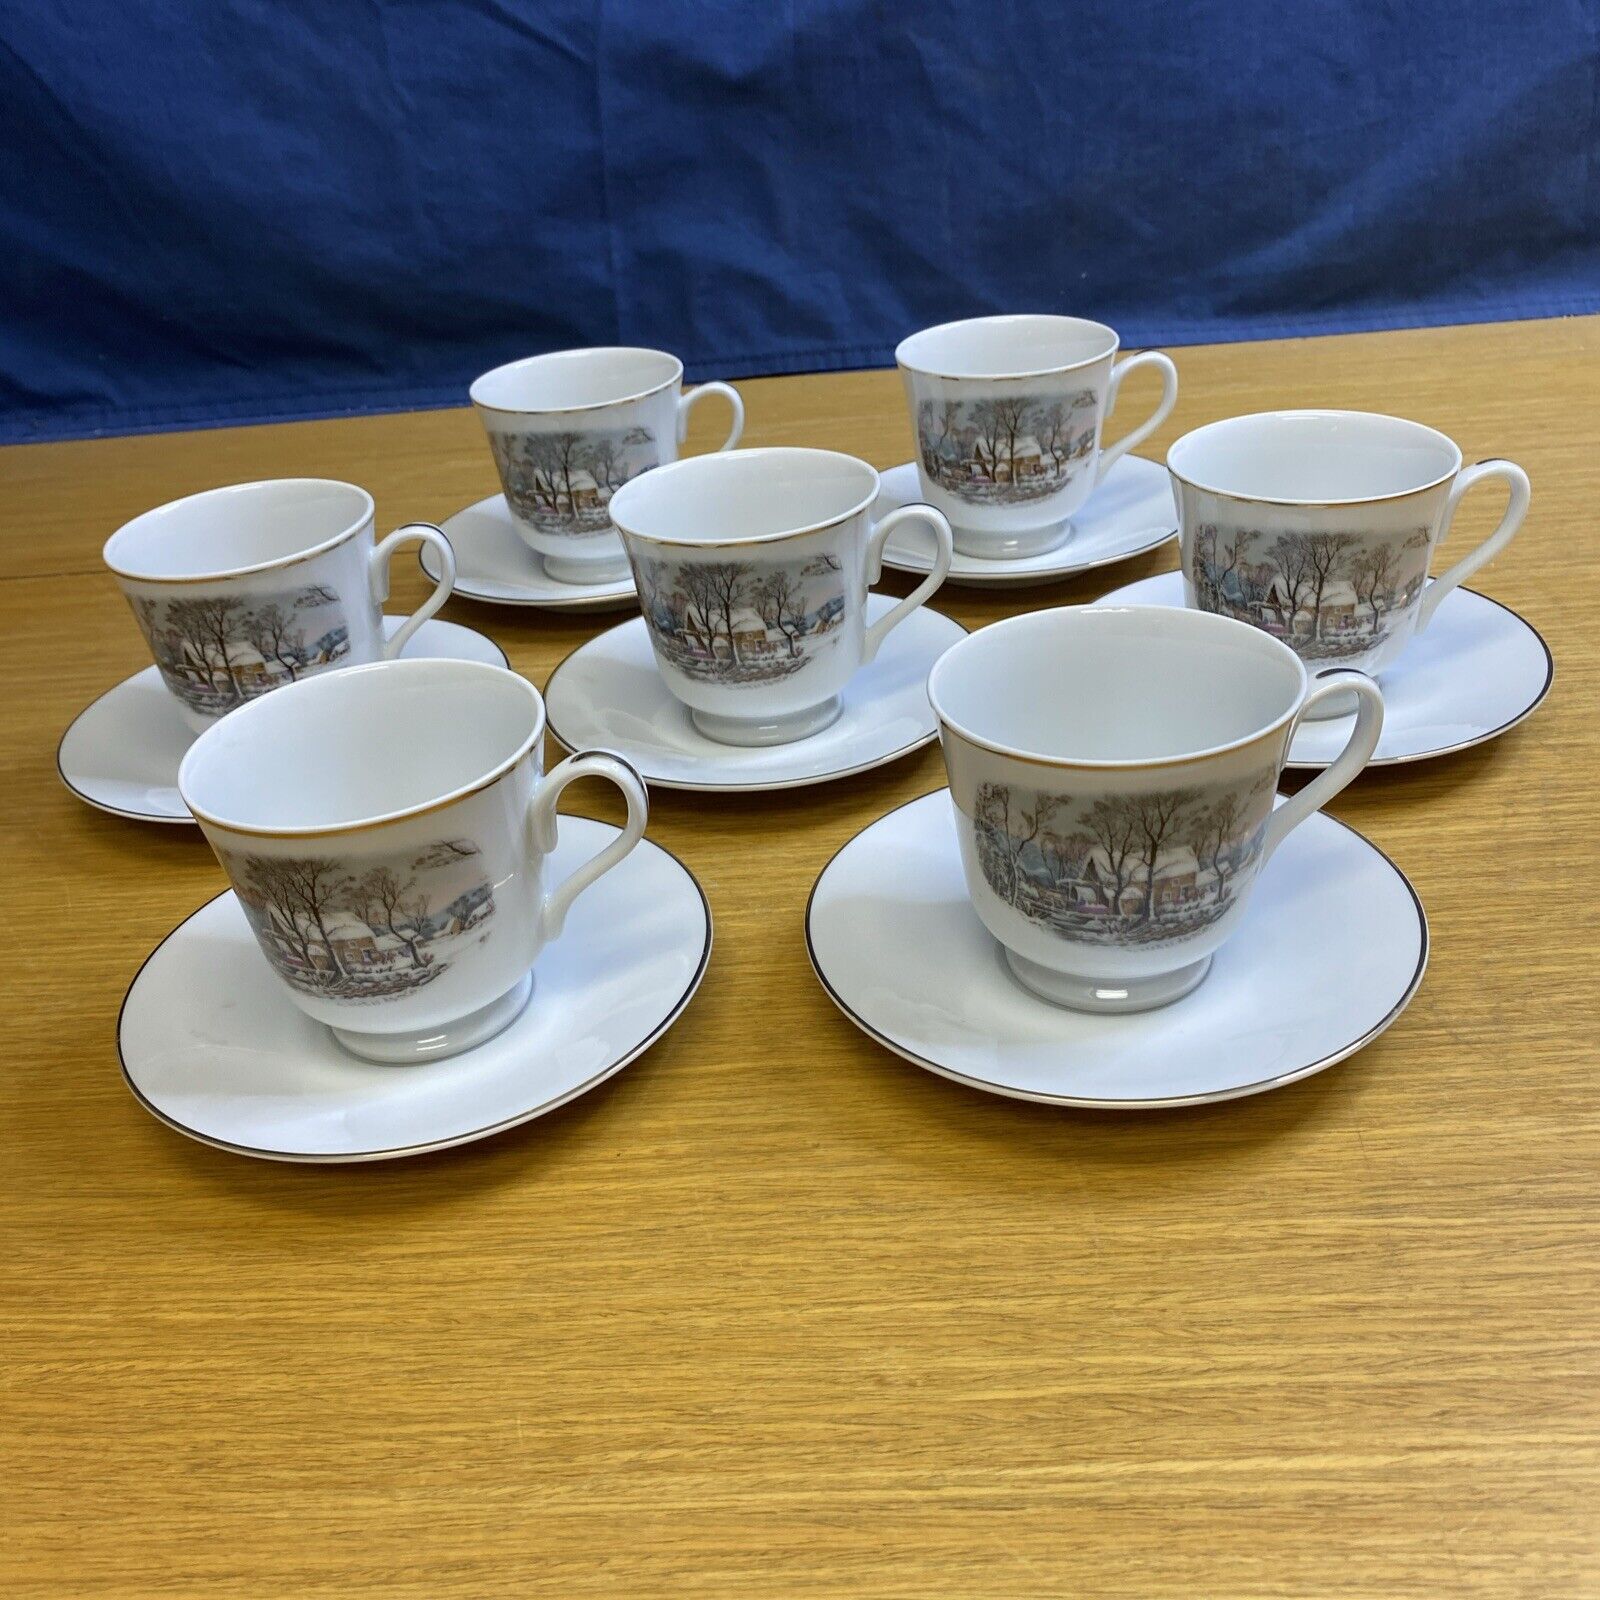 Avon 1981 Currier & Ives Winter Scene (7 Sets) Cups and Saucers - Japan